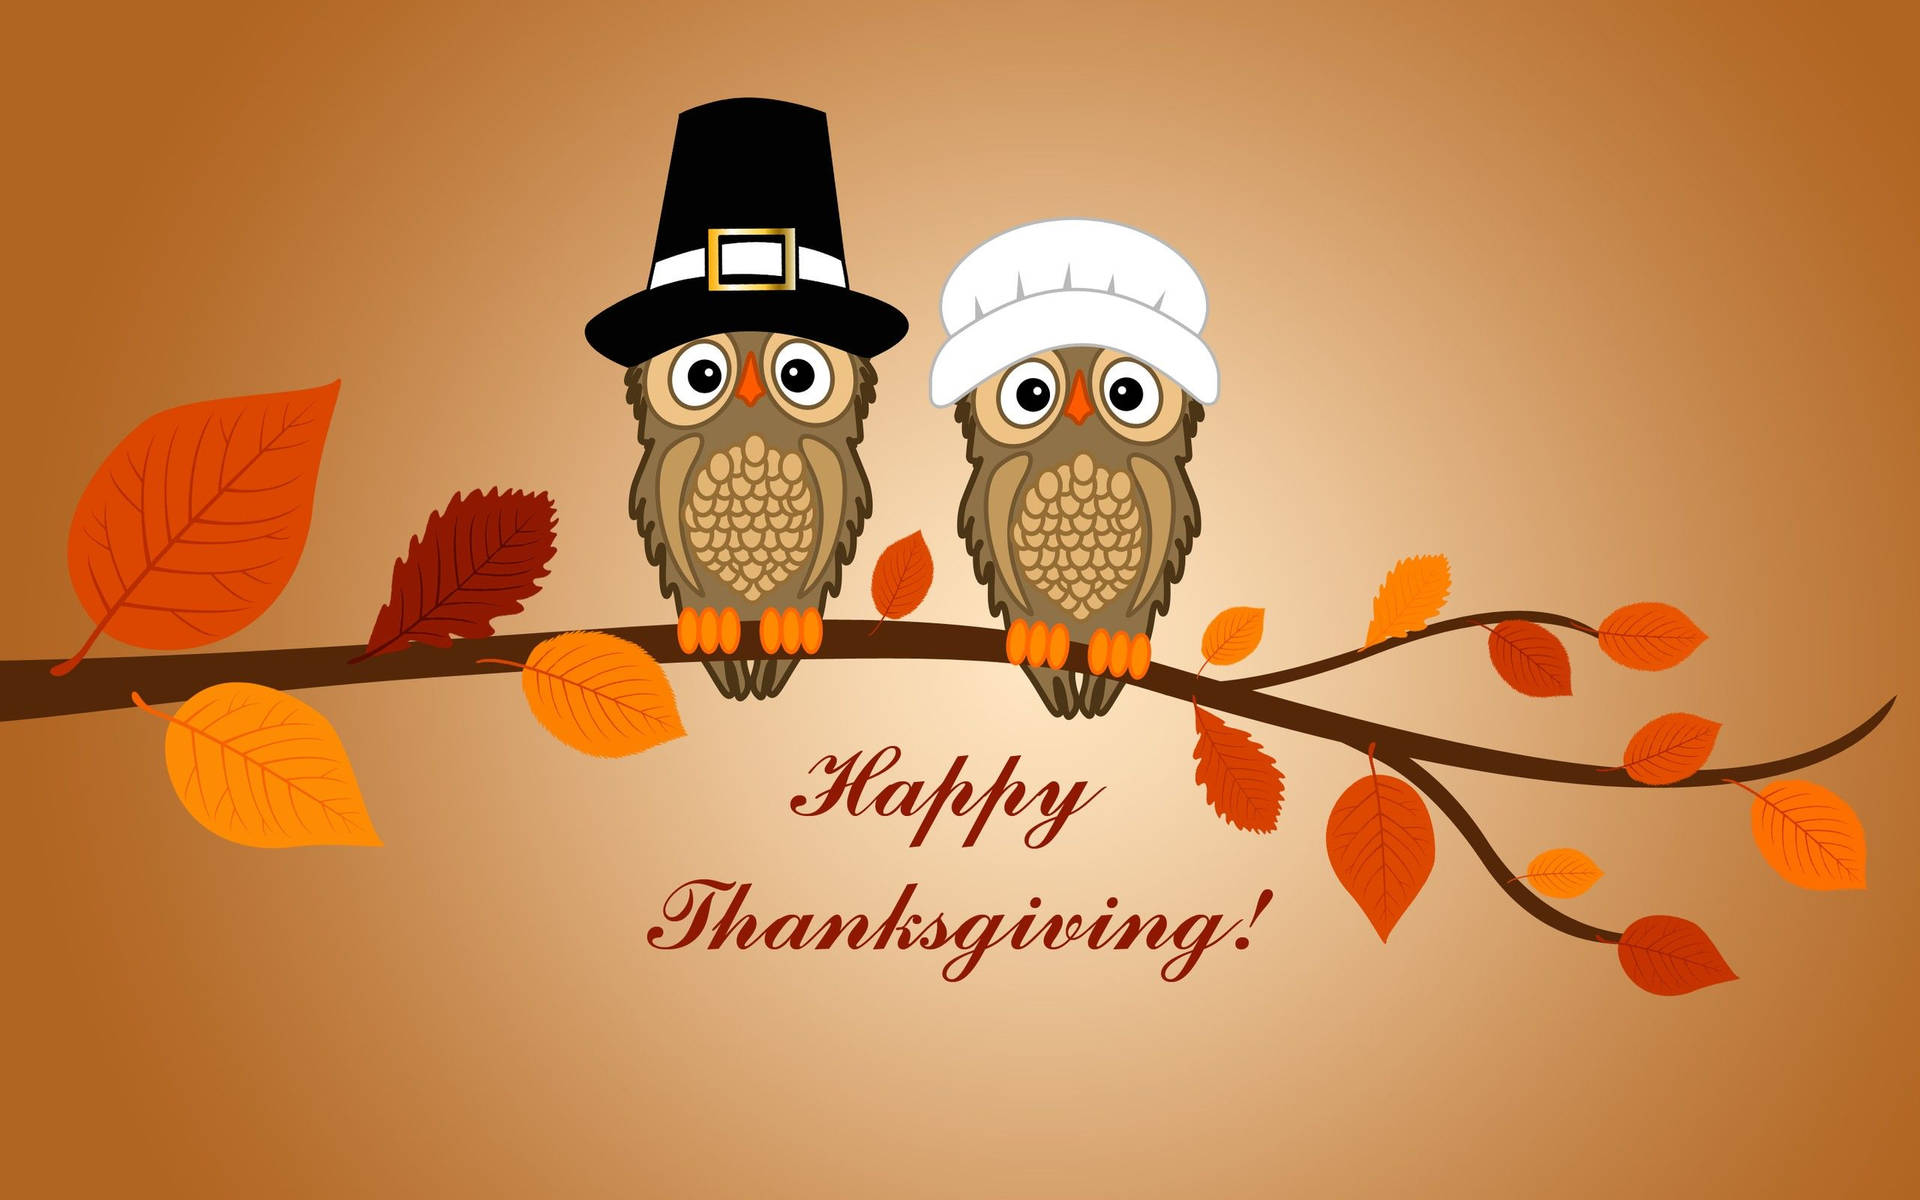 Thanksgiving Greeting Owl Couple Background